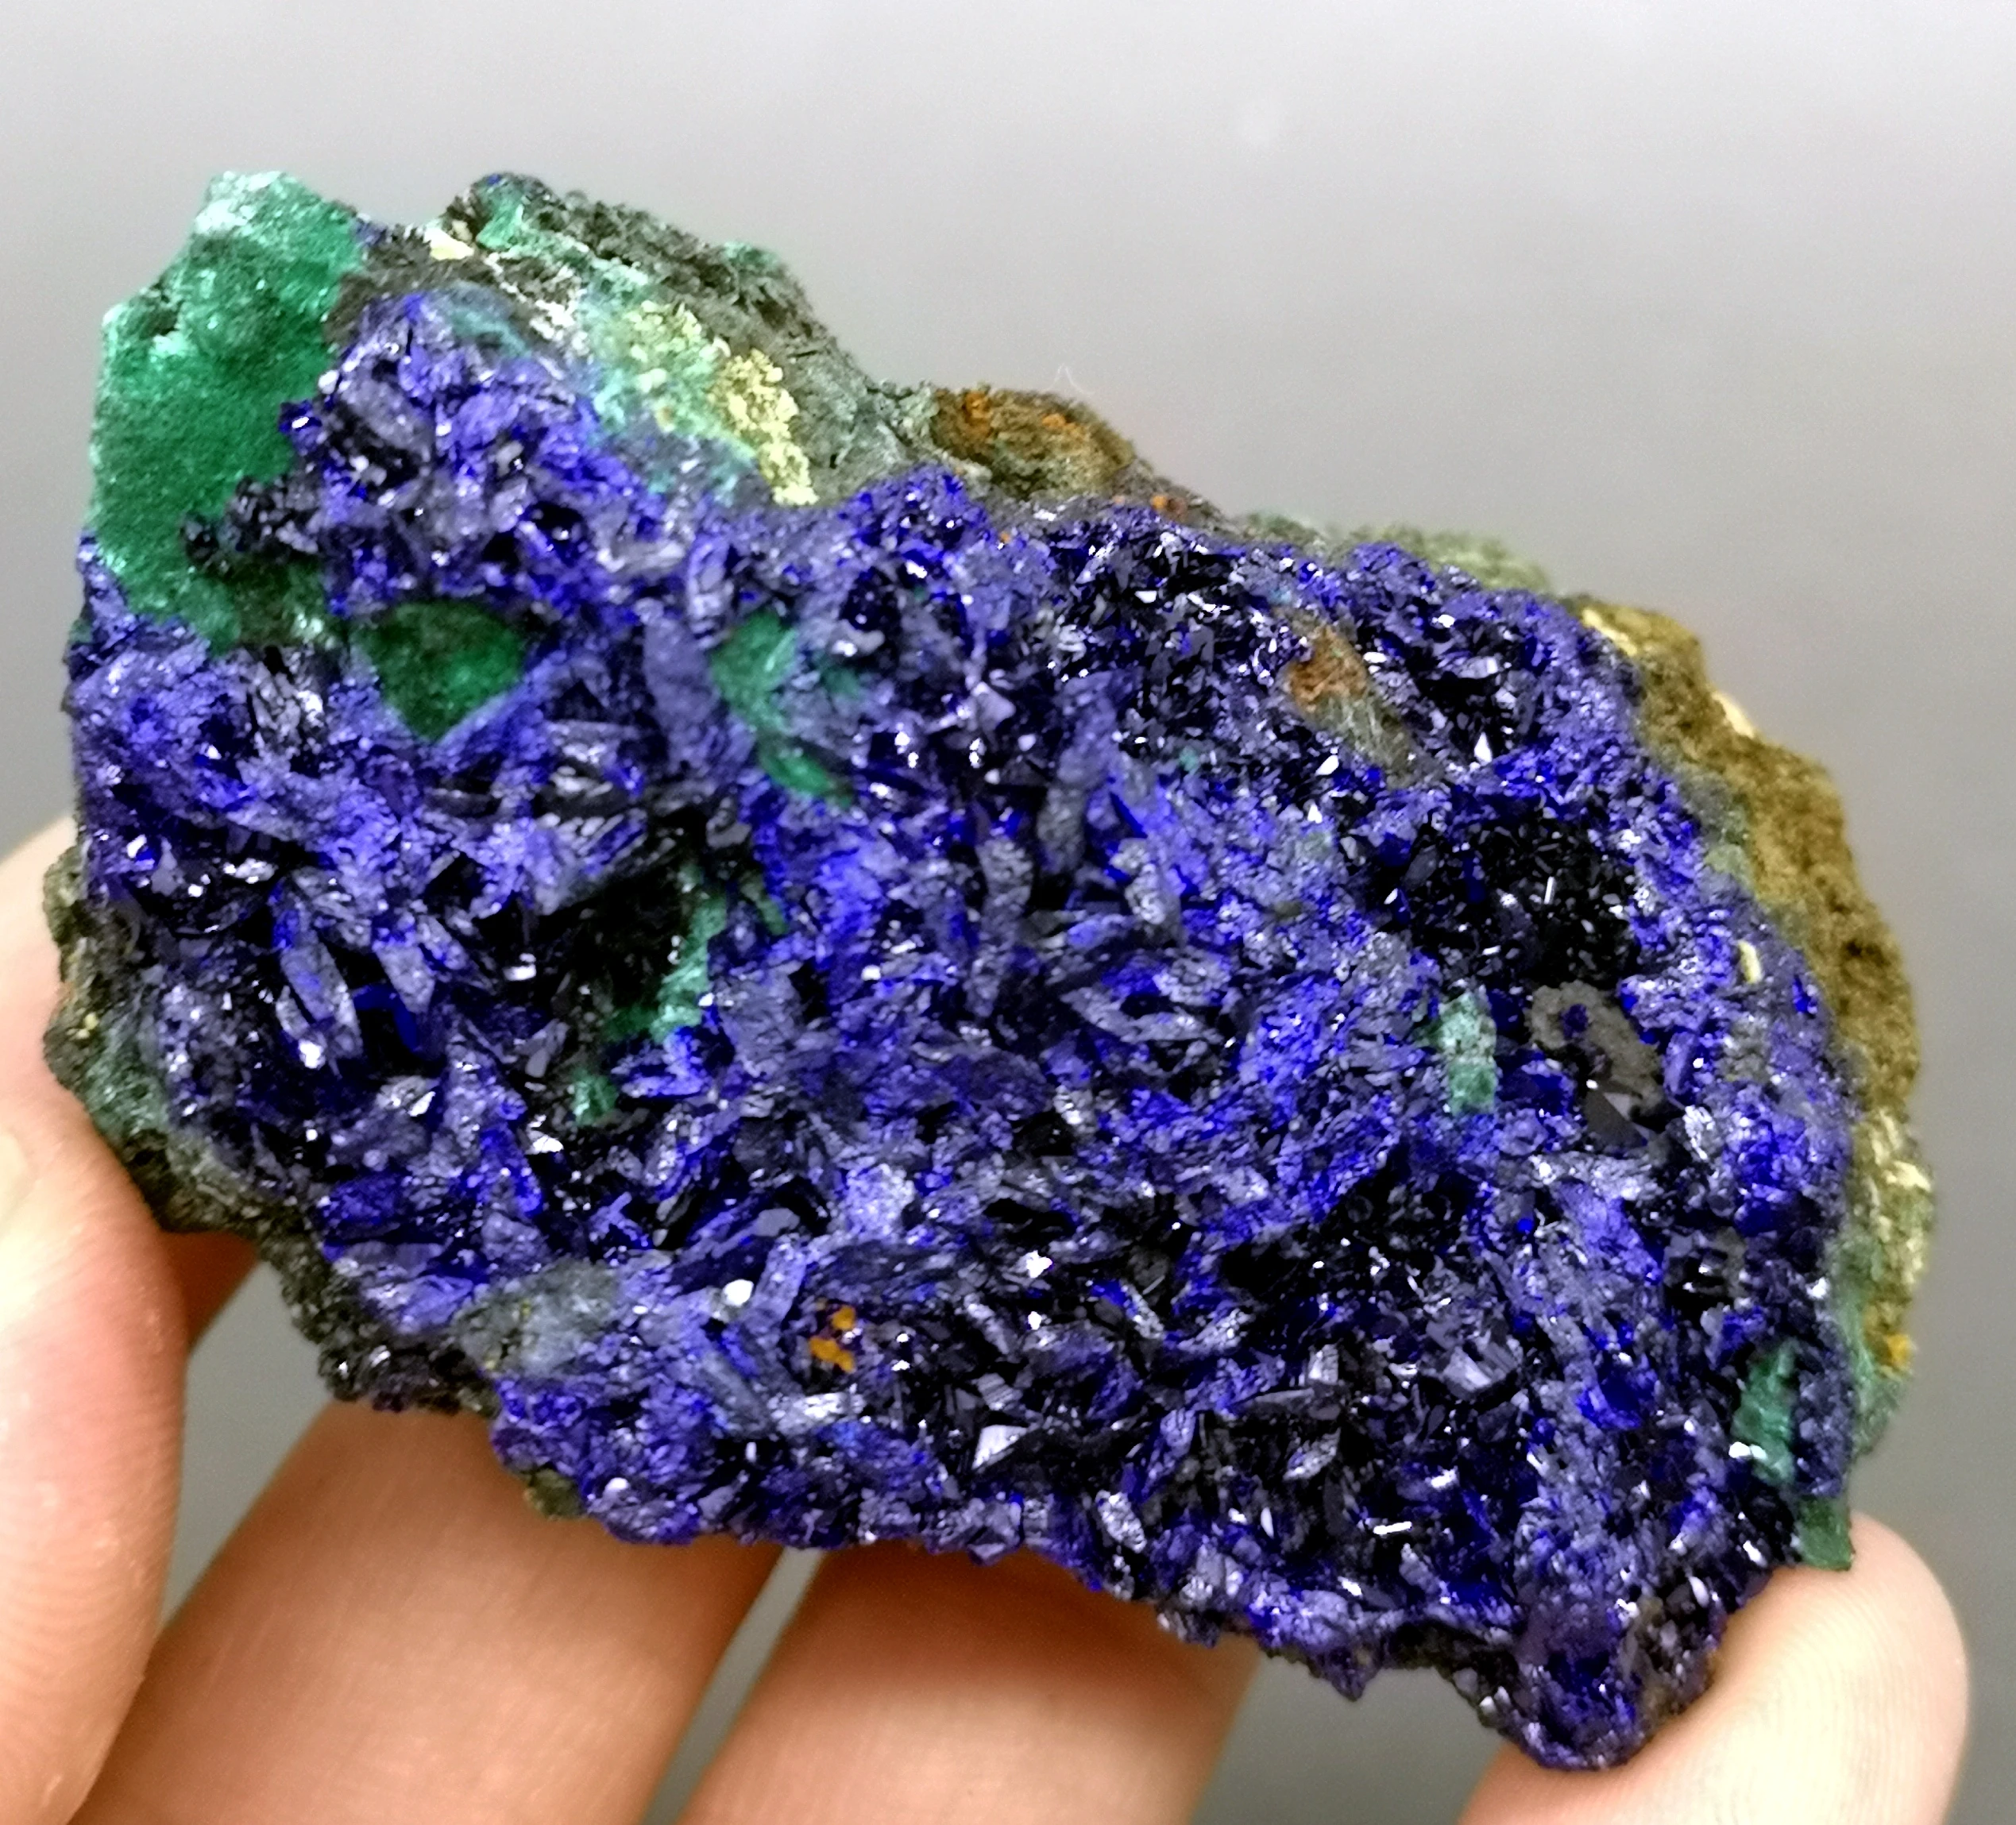 Best! 99g Natural stone shiny azurite and malachite symbiotic mineral crystal specimens Stones and crystals from China